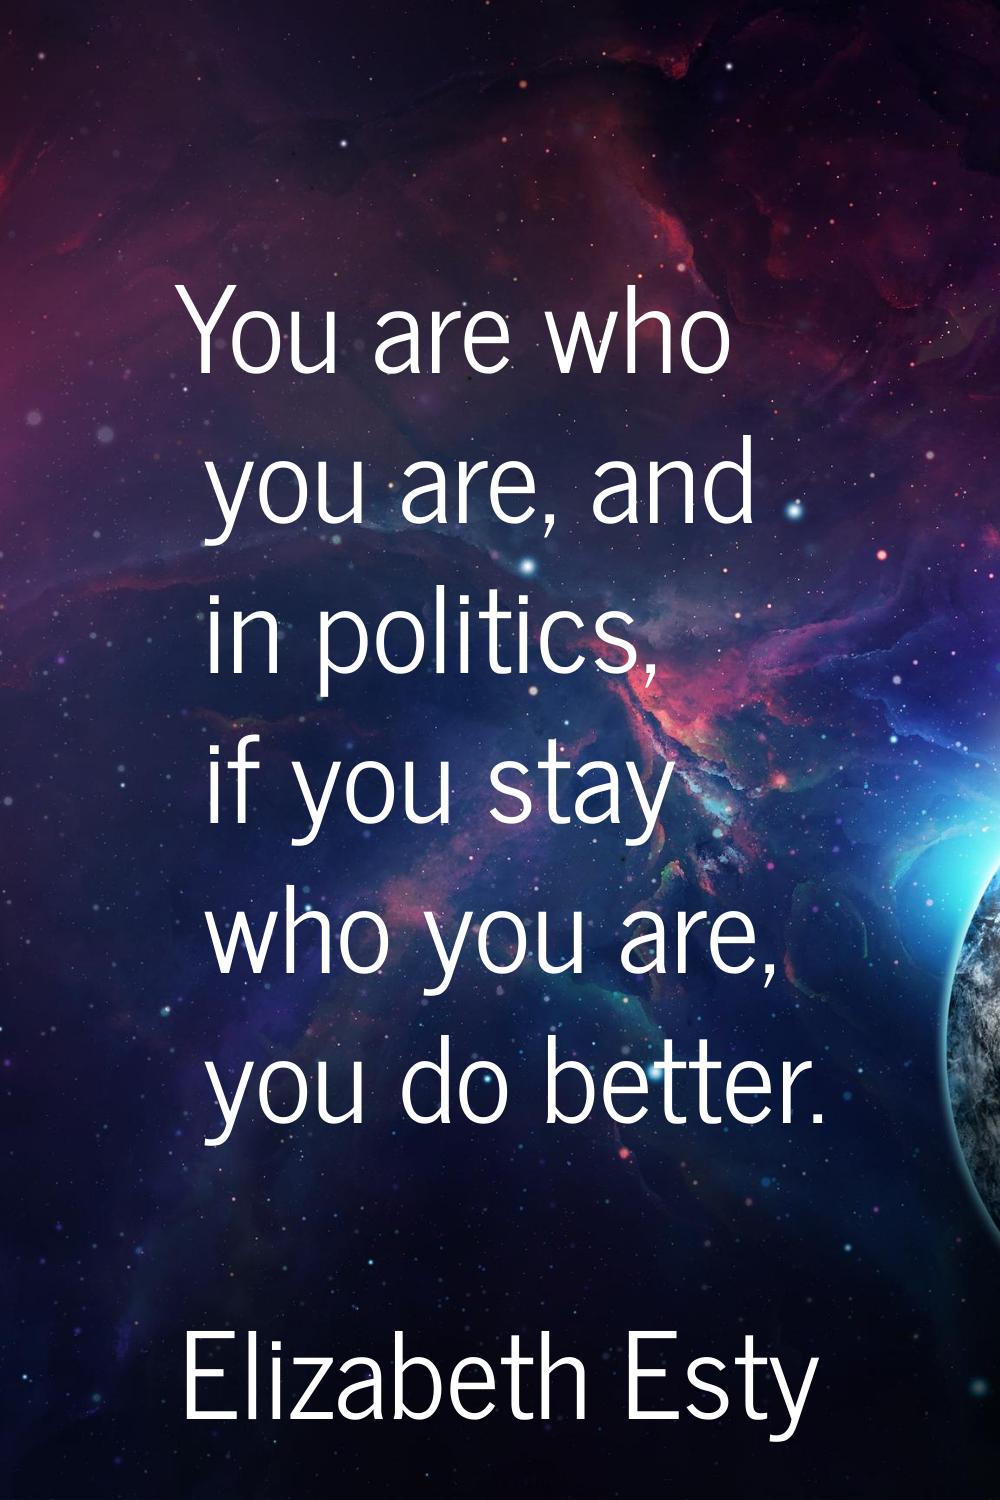 You are who you are, and in politics, if you stay who you are, you do better.